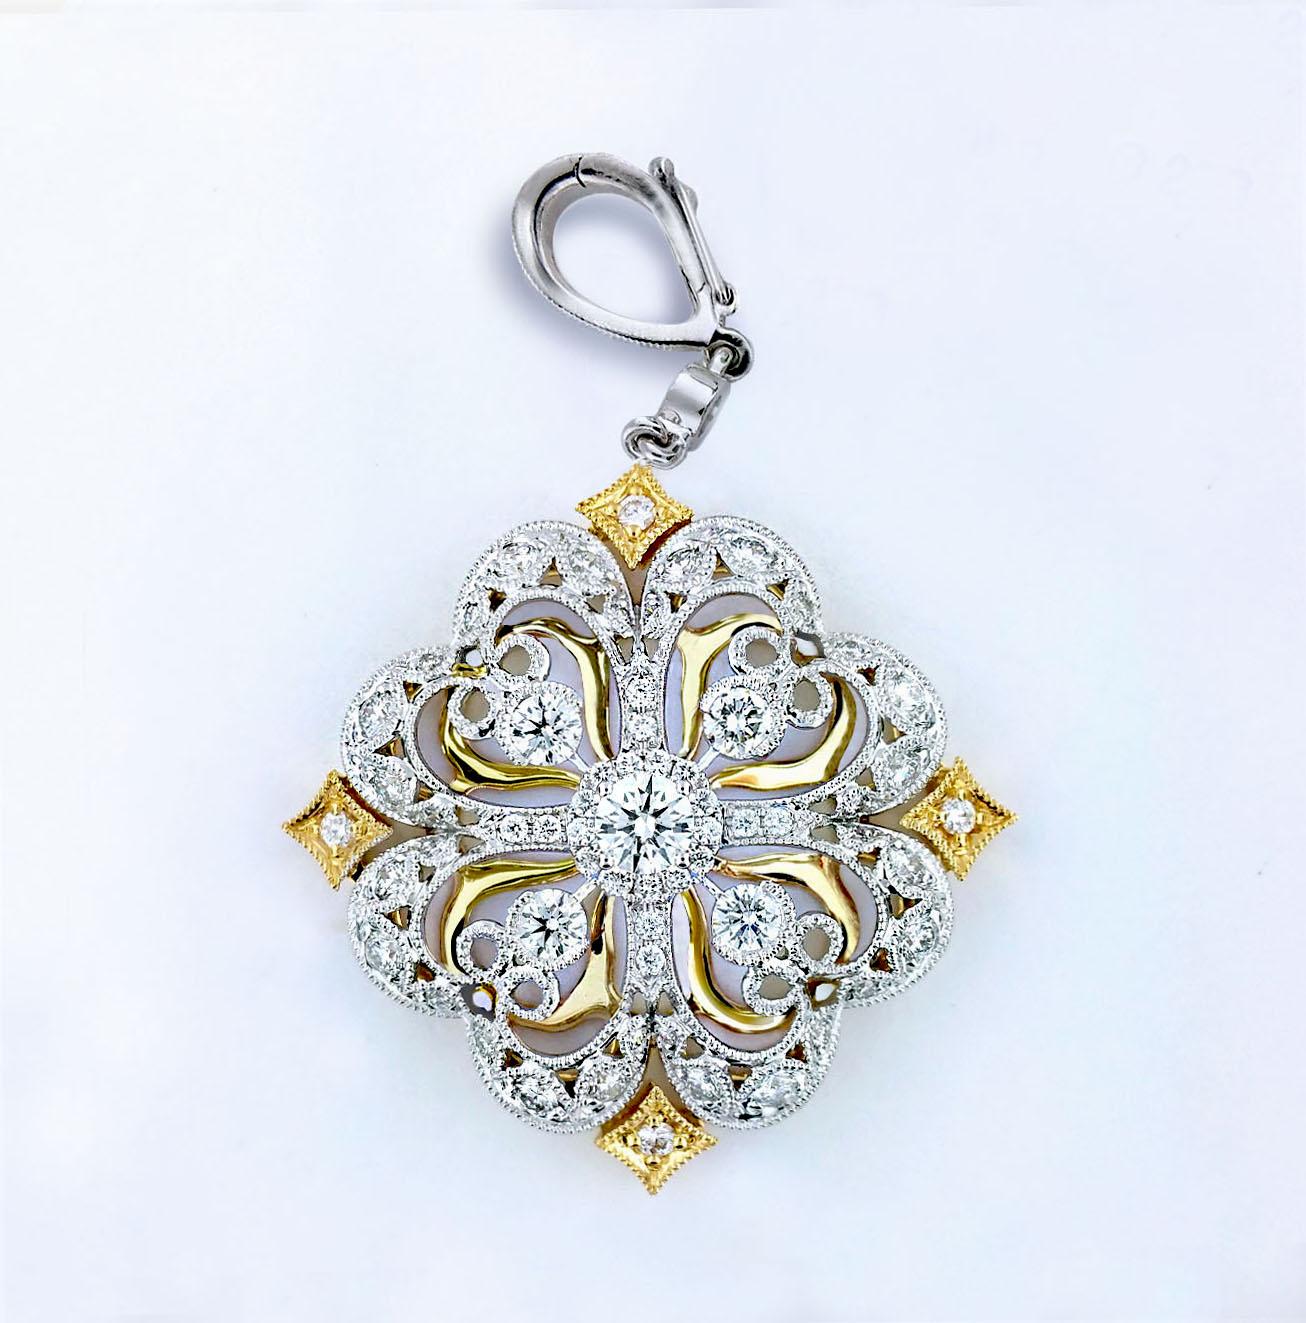 Produced by award winning Italian designer Stefano Vitolo. Stefano creates custom artisanal one of a kind jewelry with excellent gemstones in a truly old world Italian craftmanship.
This diamond pendant has 1.44 total carat weight of F/G color and